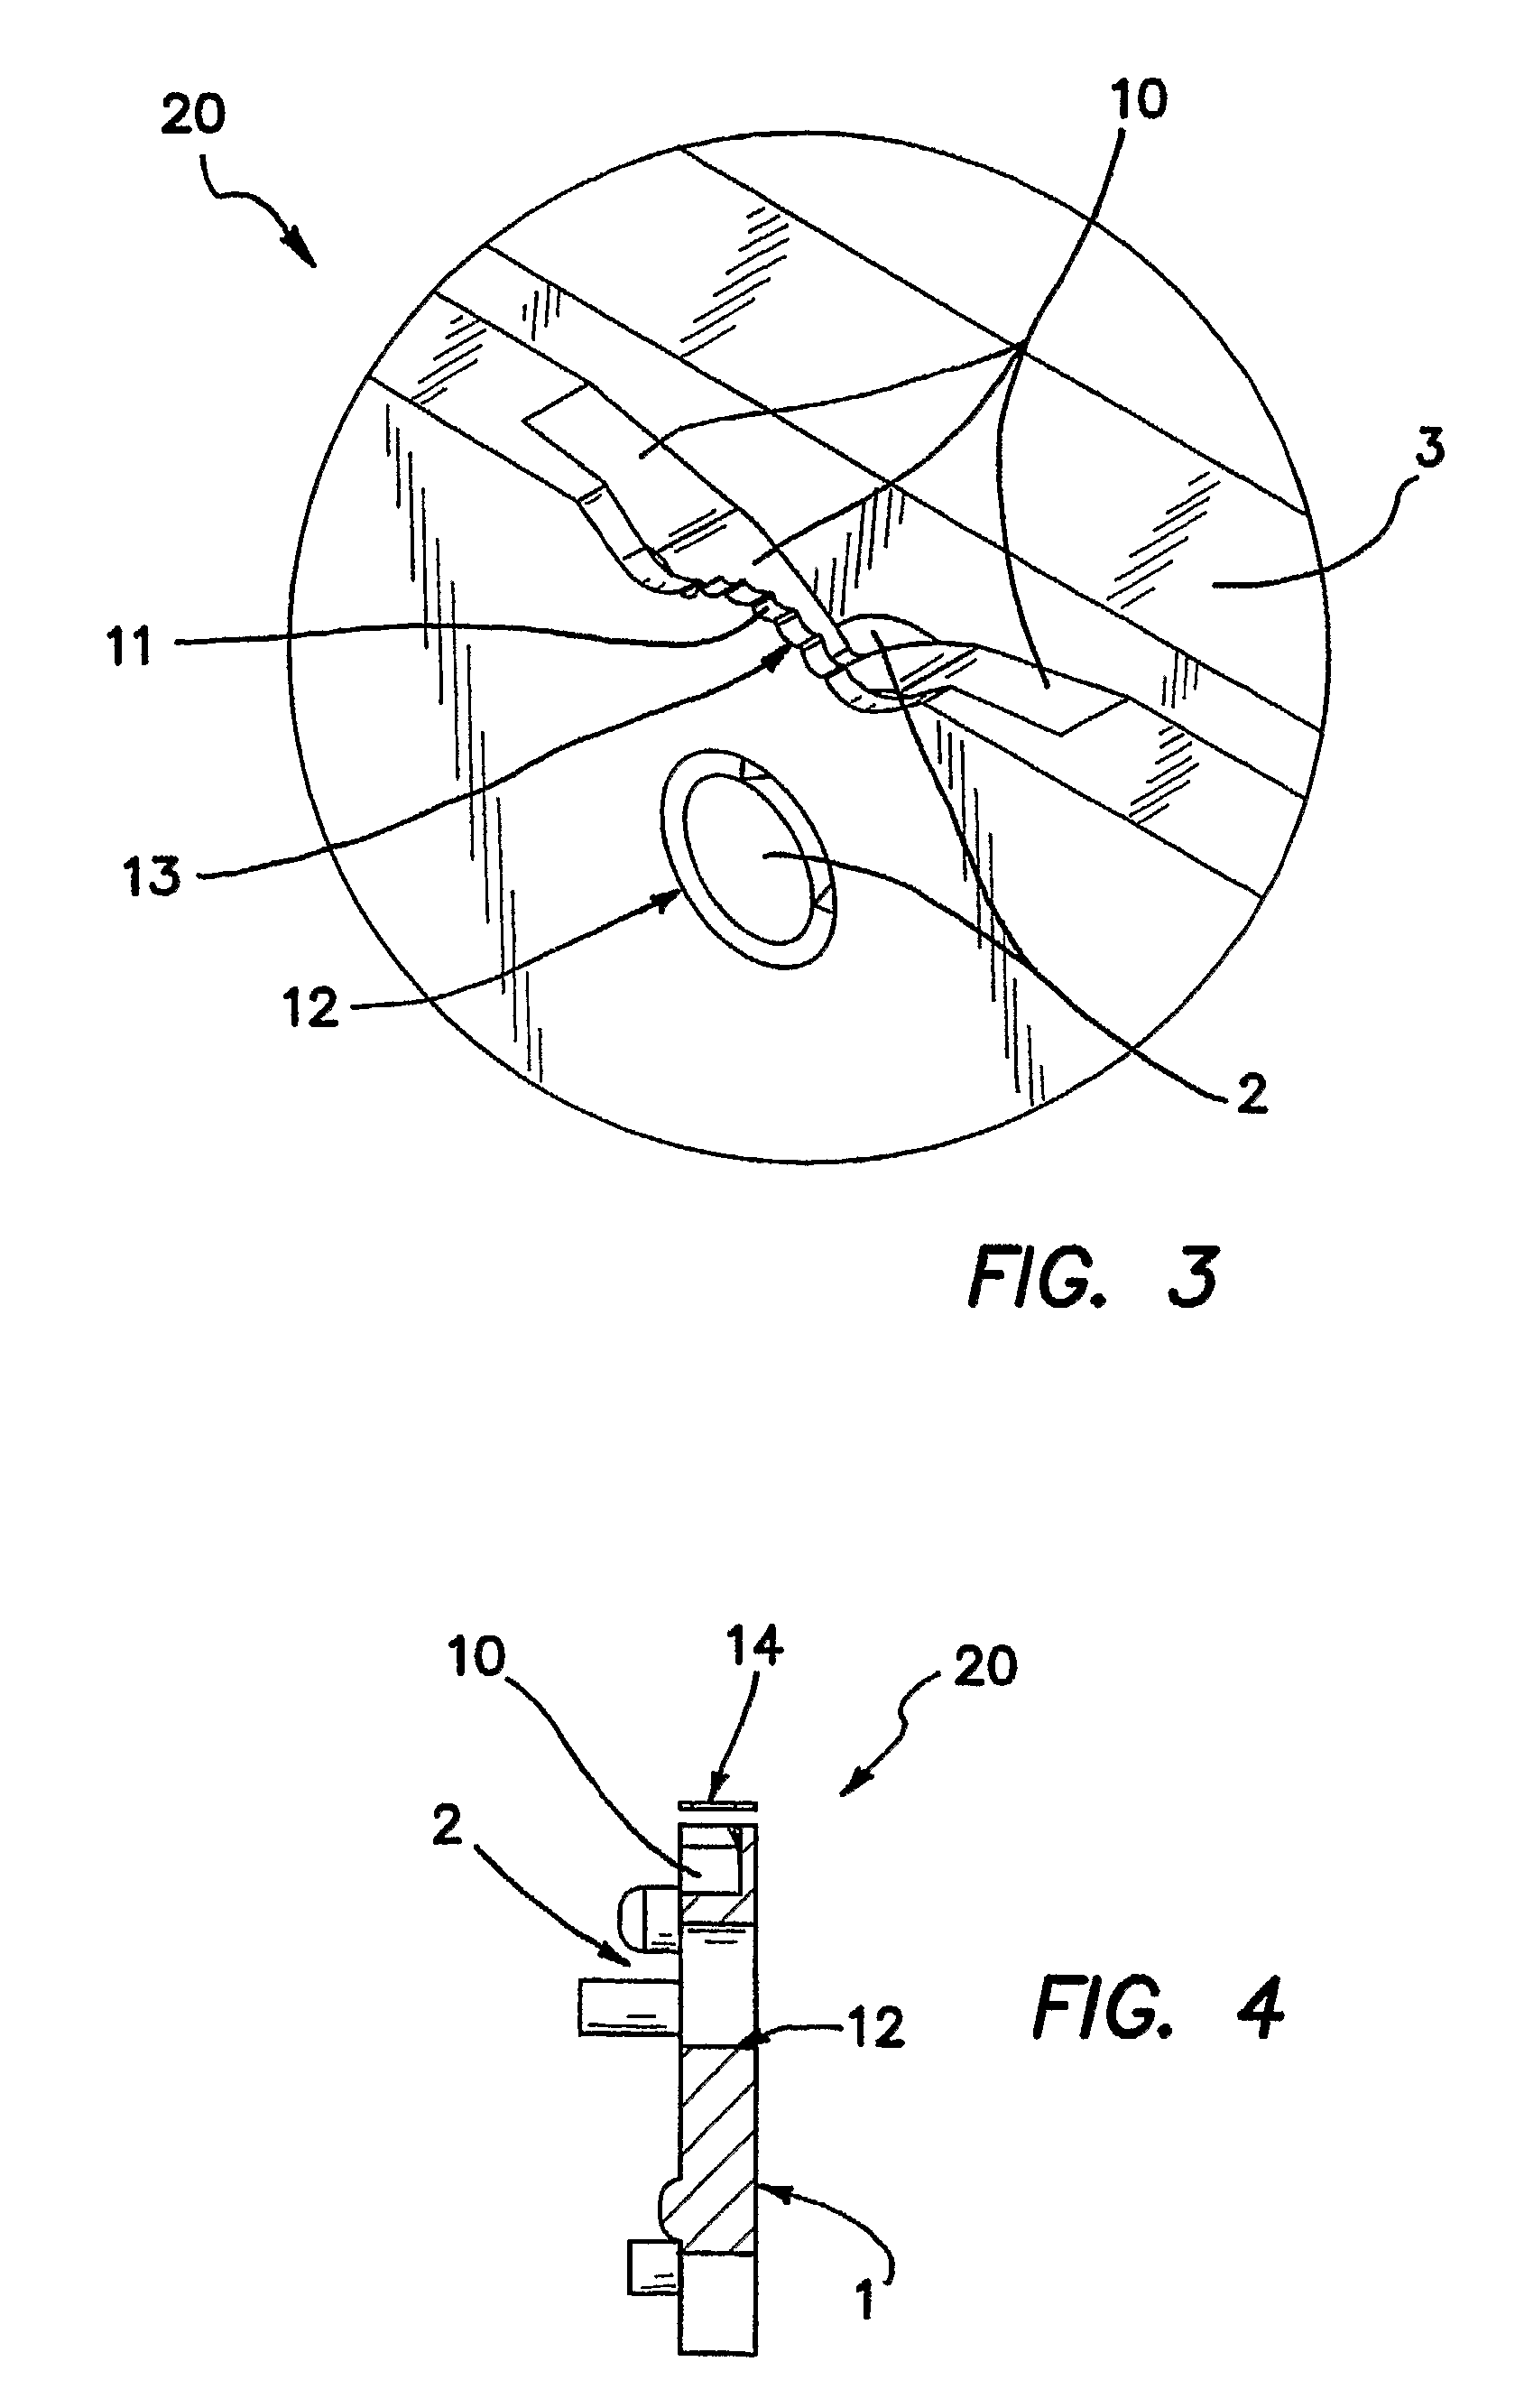 Apparatus and method of using an LED light source to generate an efficient, narrow, high-aspect ratio light pattern